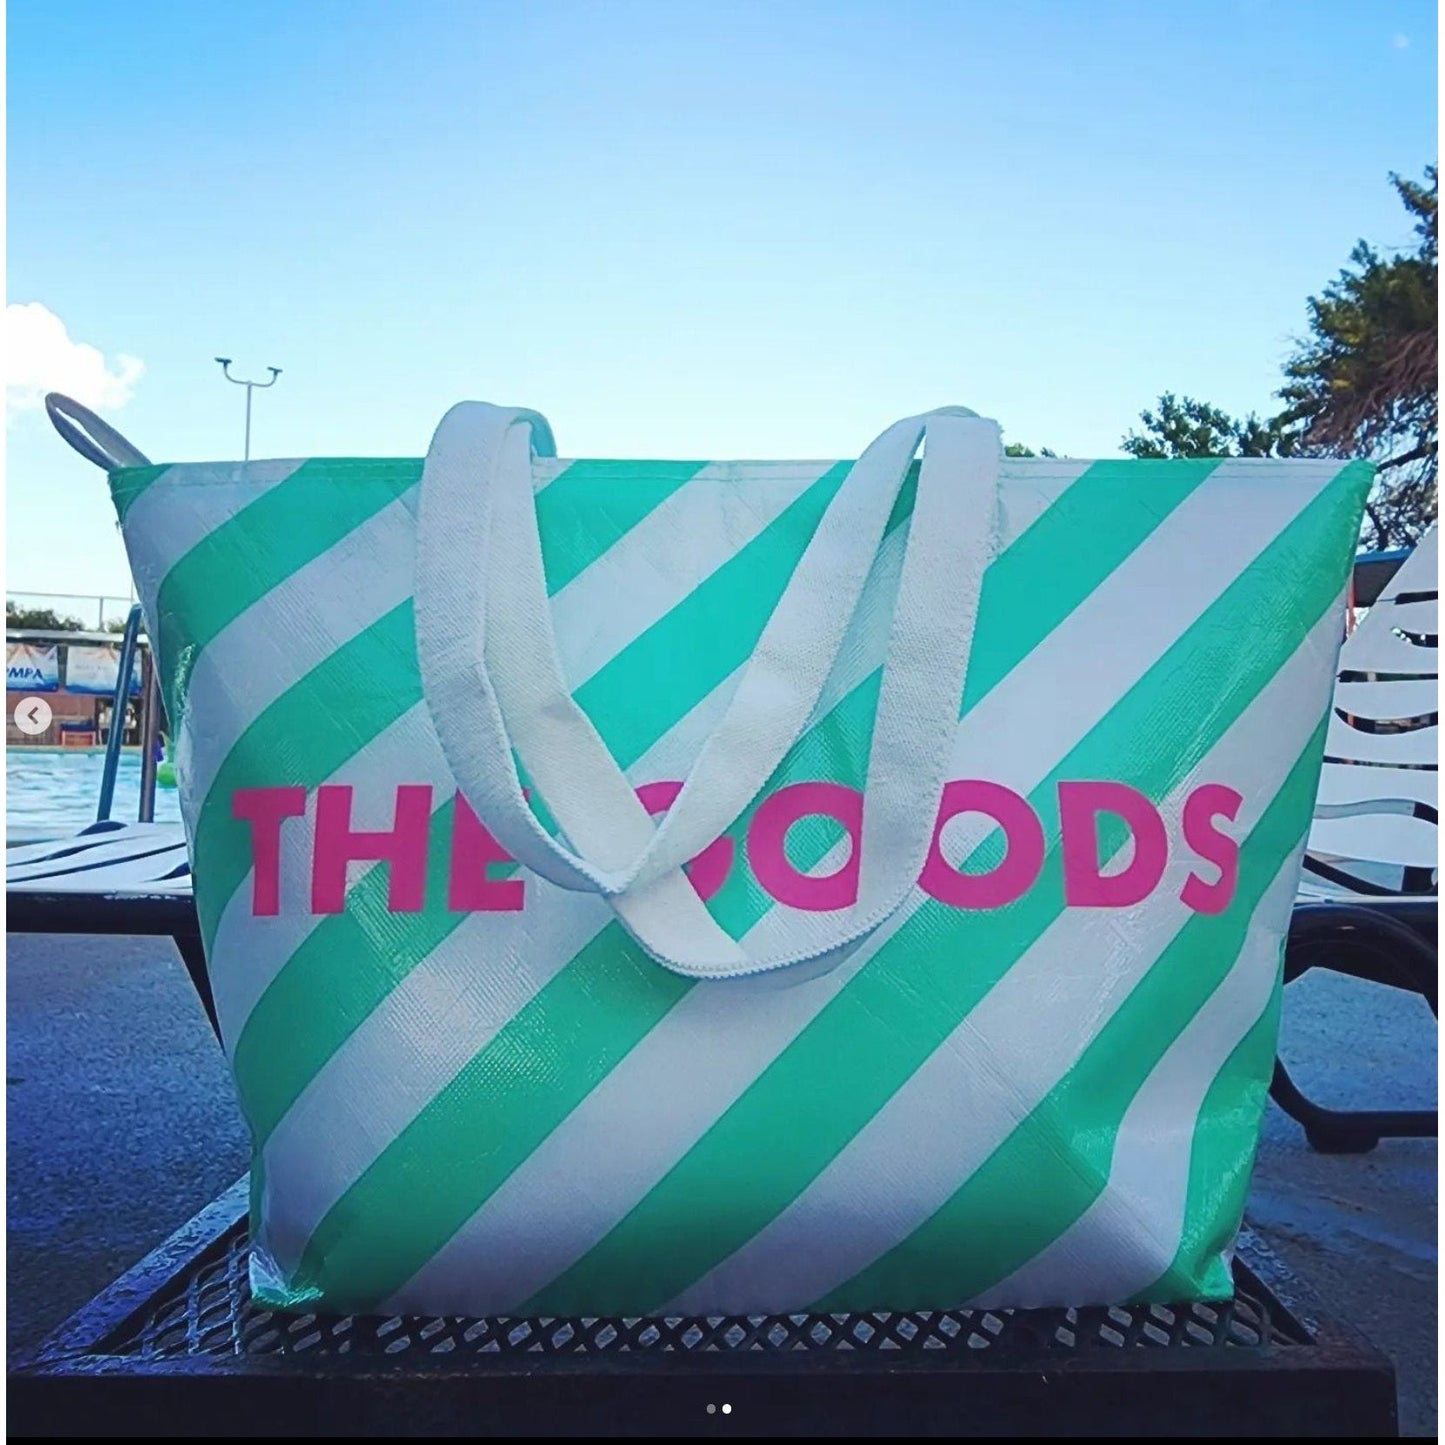 The Goods Cooler Insulated Tote Bag in Green and White Stripes | Soft Flexible Cooler